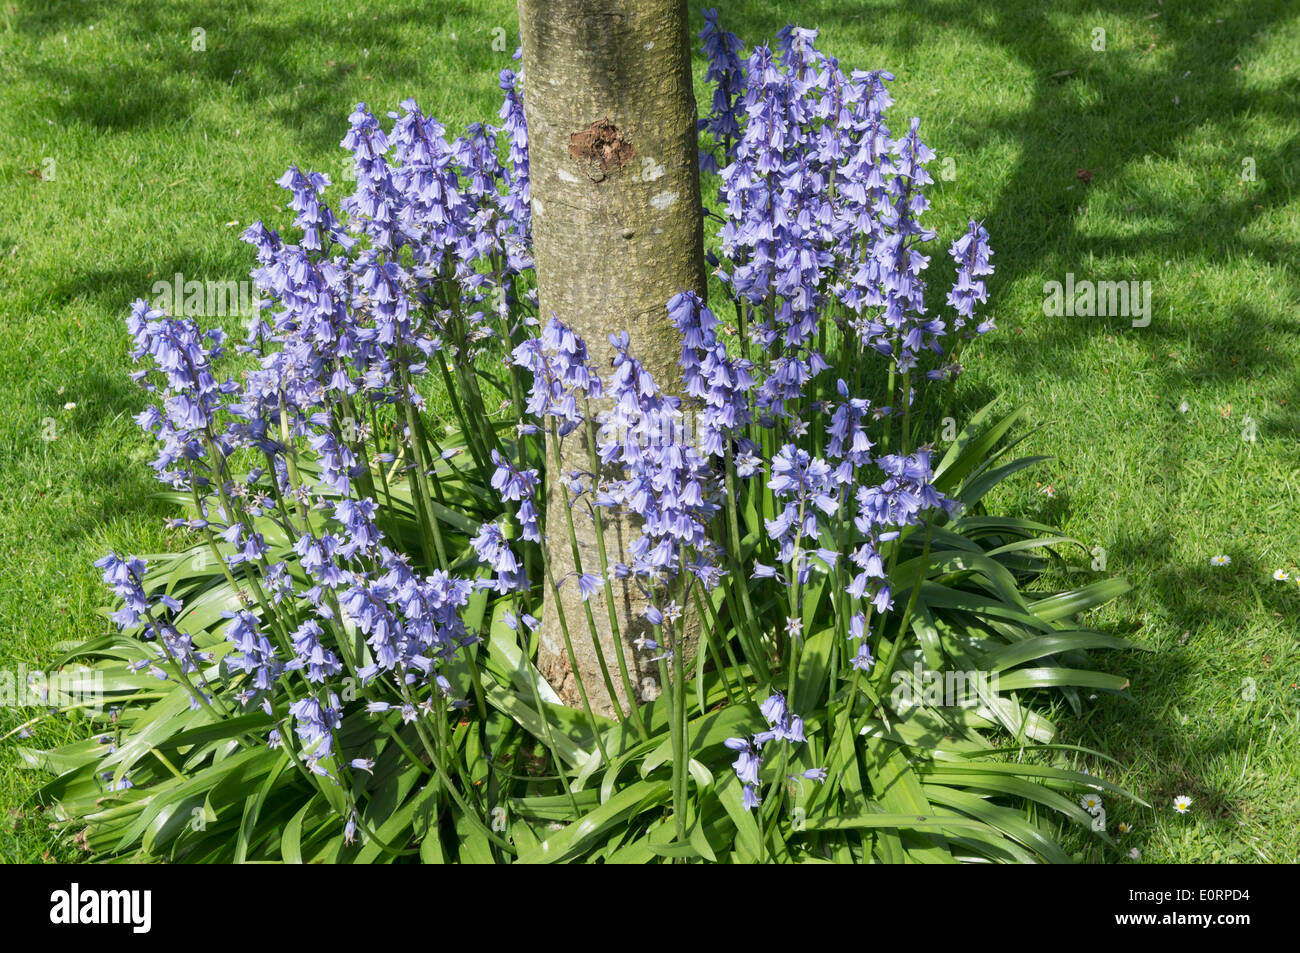 Group of bluebell flowers coming into bloom around the base of a tree in the spring season, UK Stock Photo